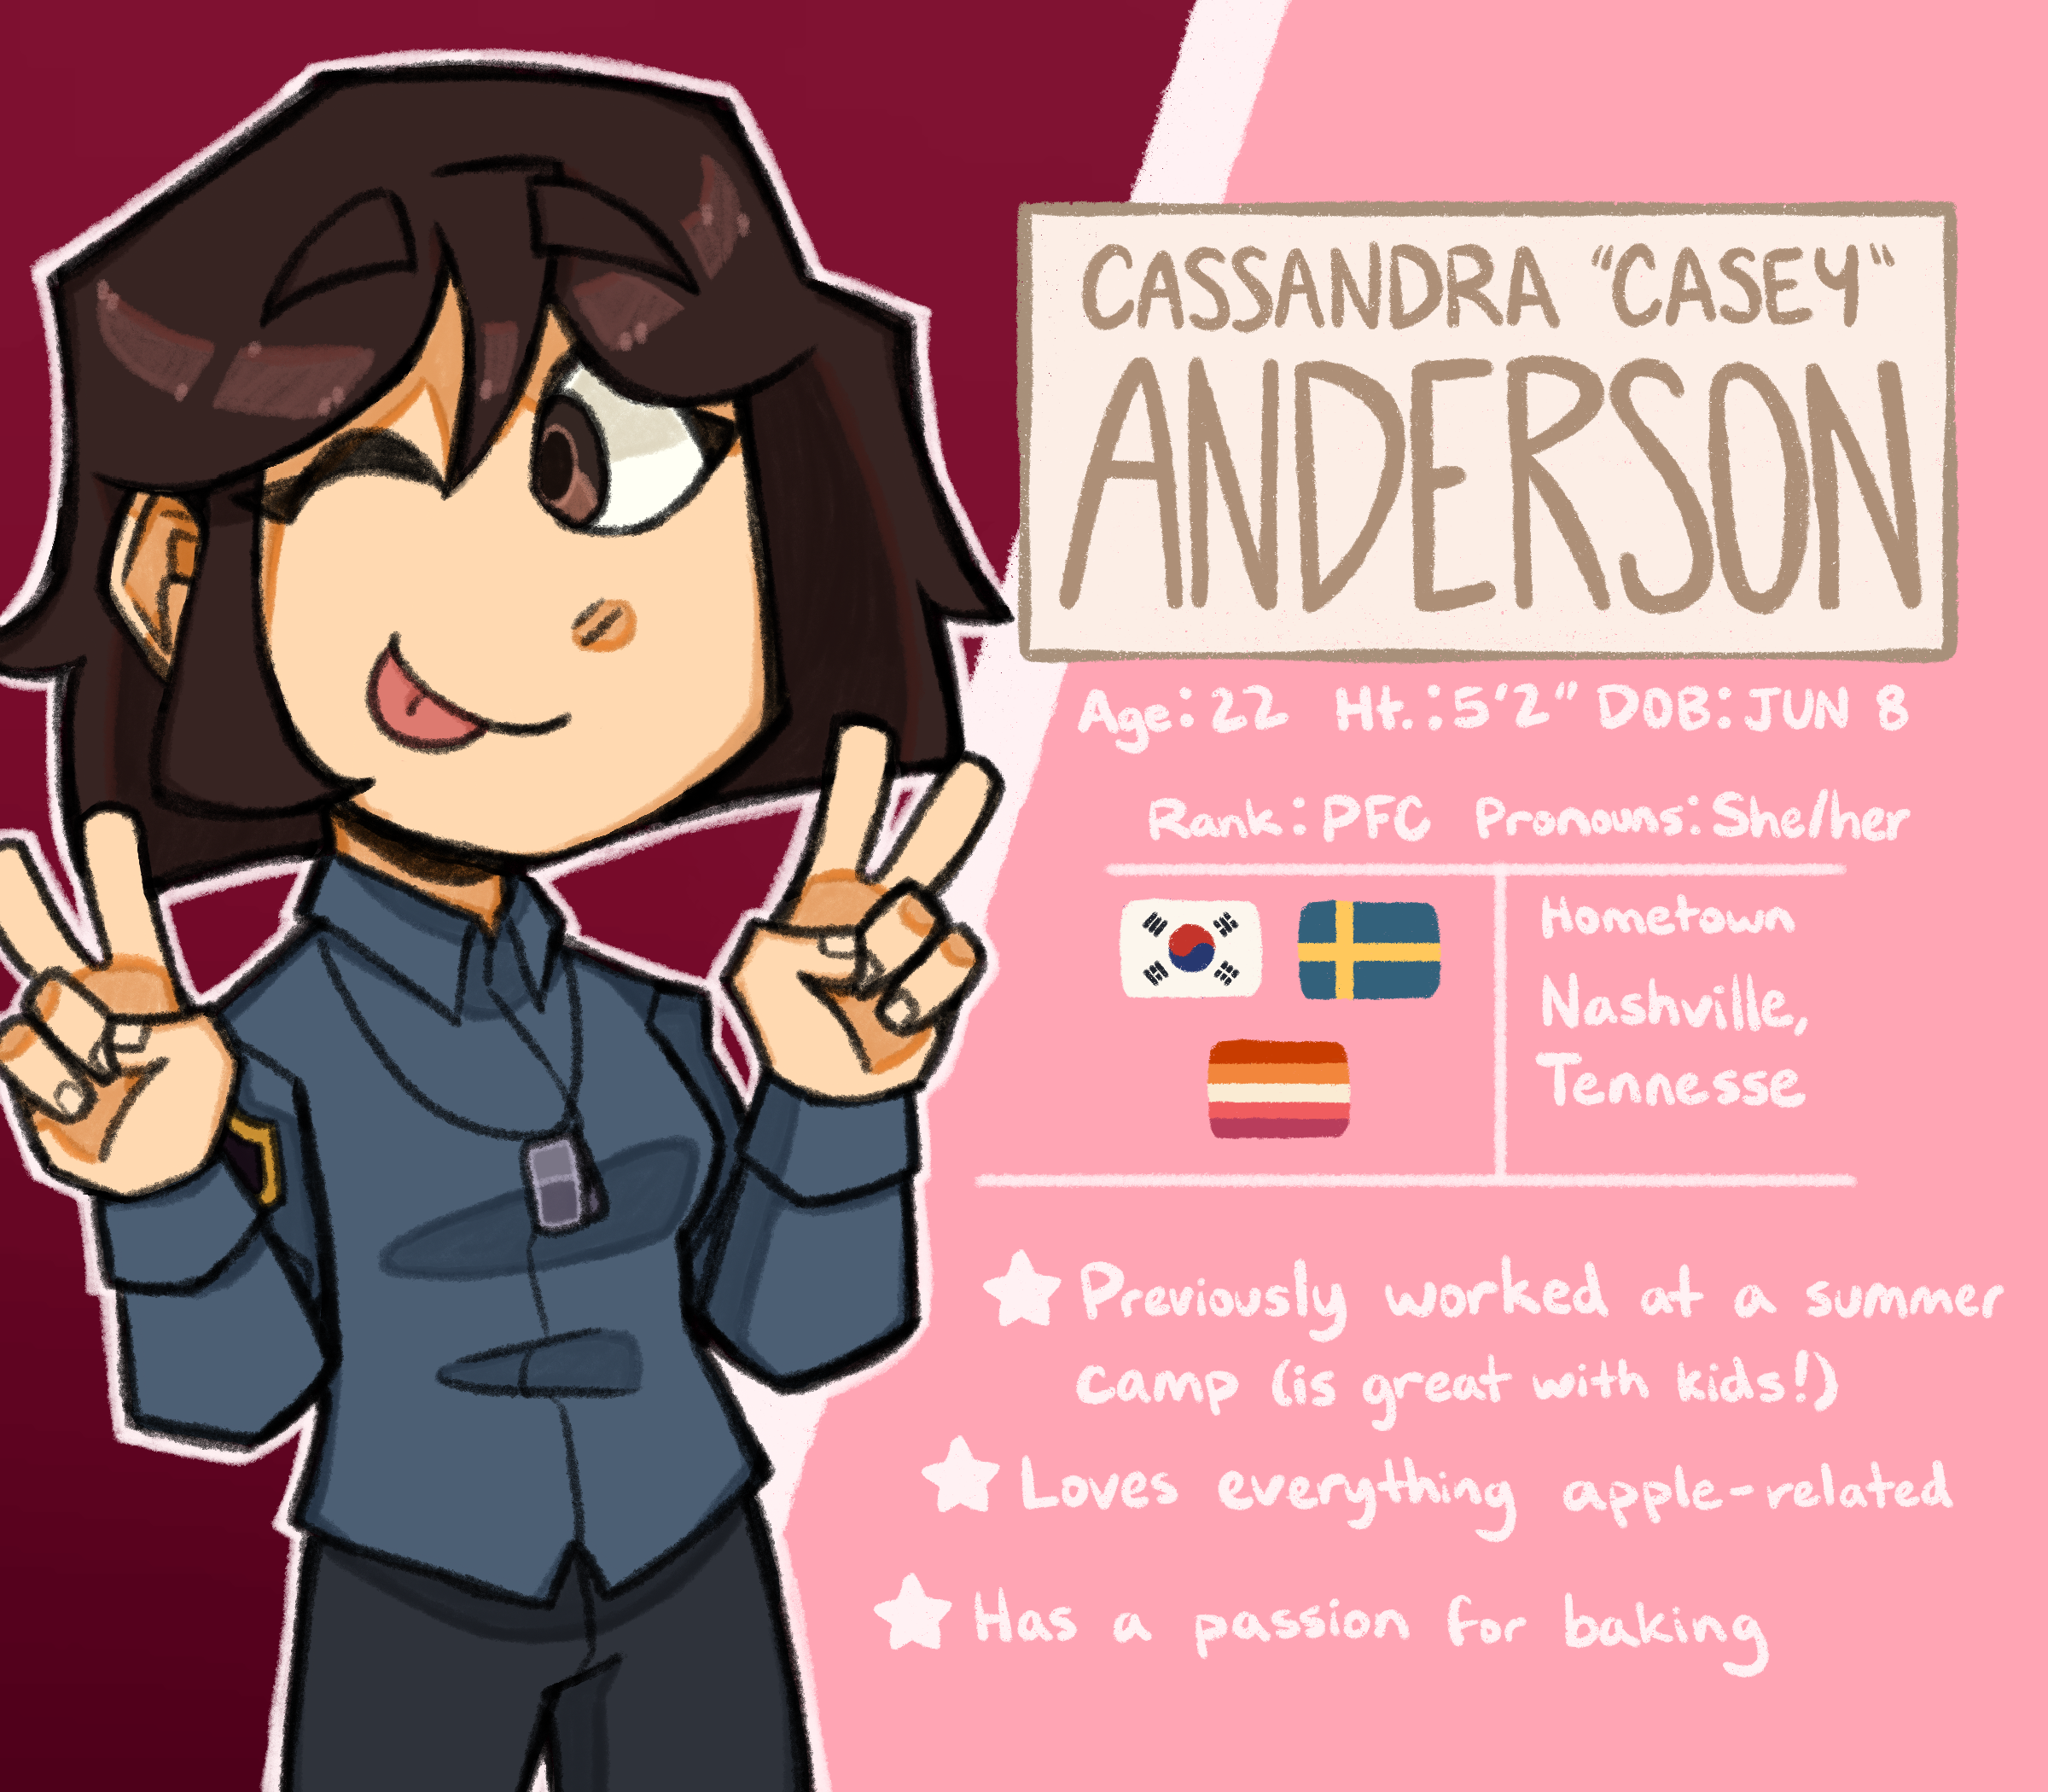 A character bio for Cassandra 'Casey' Anderson. Age: 22, Height: 5'2, Date of Birth: June 8. Rank: Private First Class, Pronouns: She/her. Anderson is of Korean-Swedish descent, and identifies as a cisgender lesbian. Her hometown is Nashville, Tennesse. Fun facts include: She previously worked at a summer camp (is great with kids!), she loves everything apple-related, and she has a passion for baking.